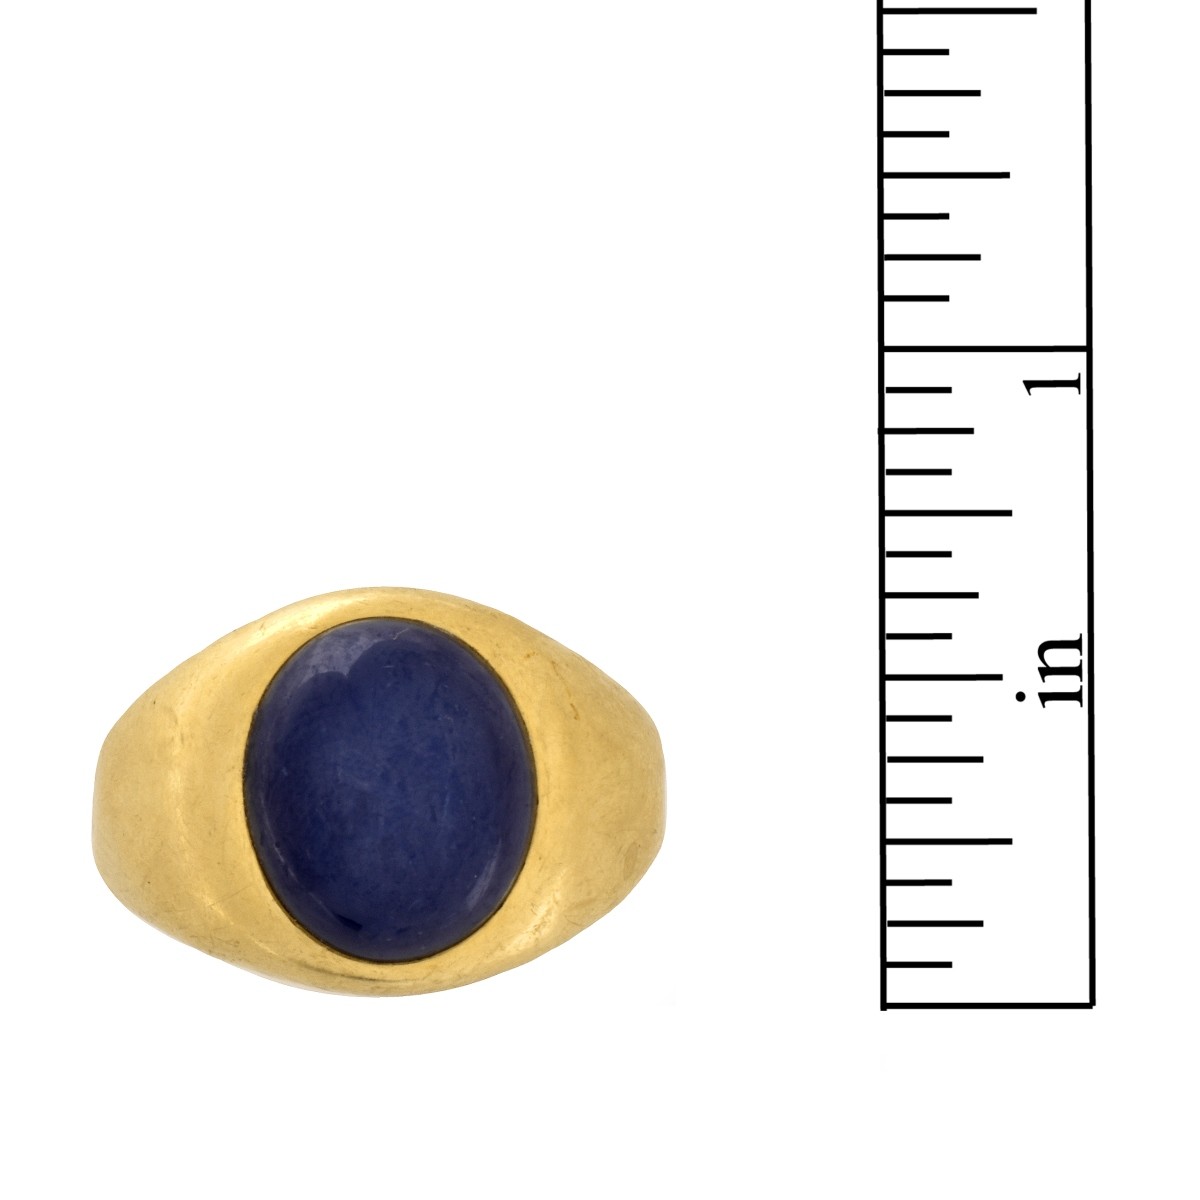 Men's Sapphire and 14K Ring